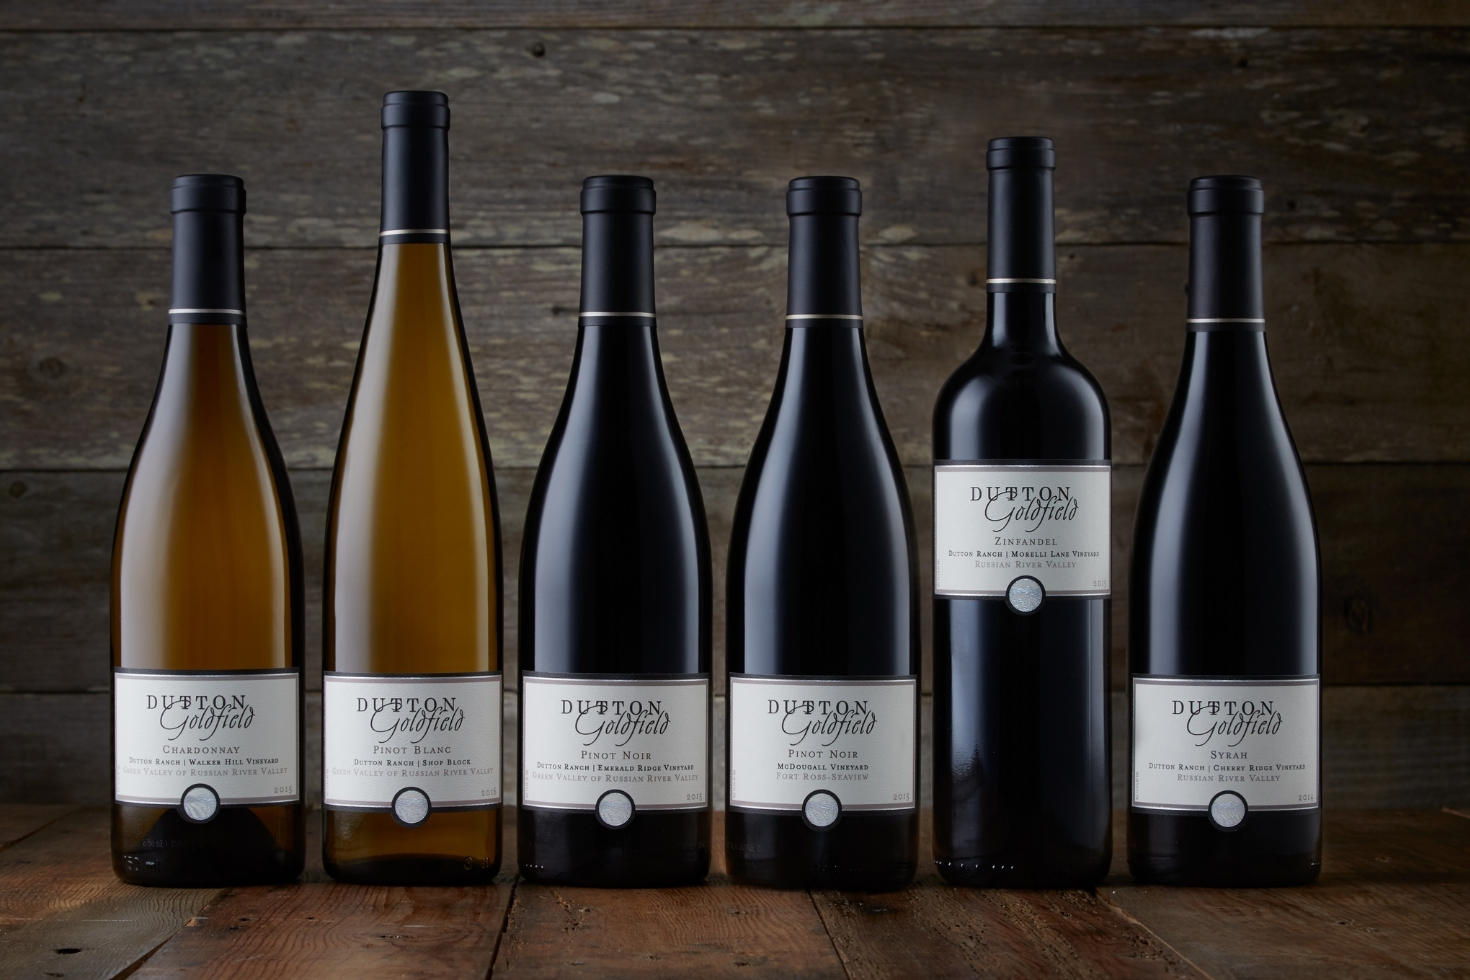 Six bottles of wine in front of a wooden wall